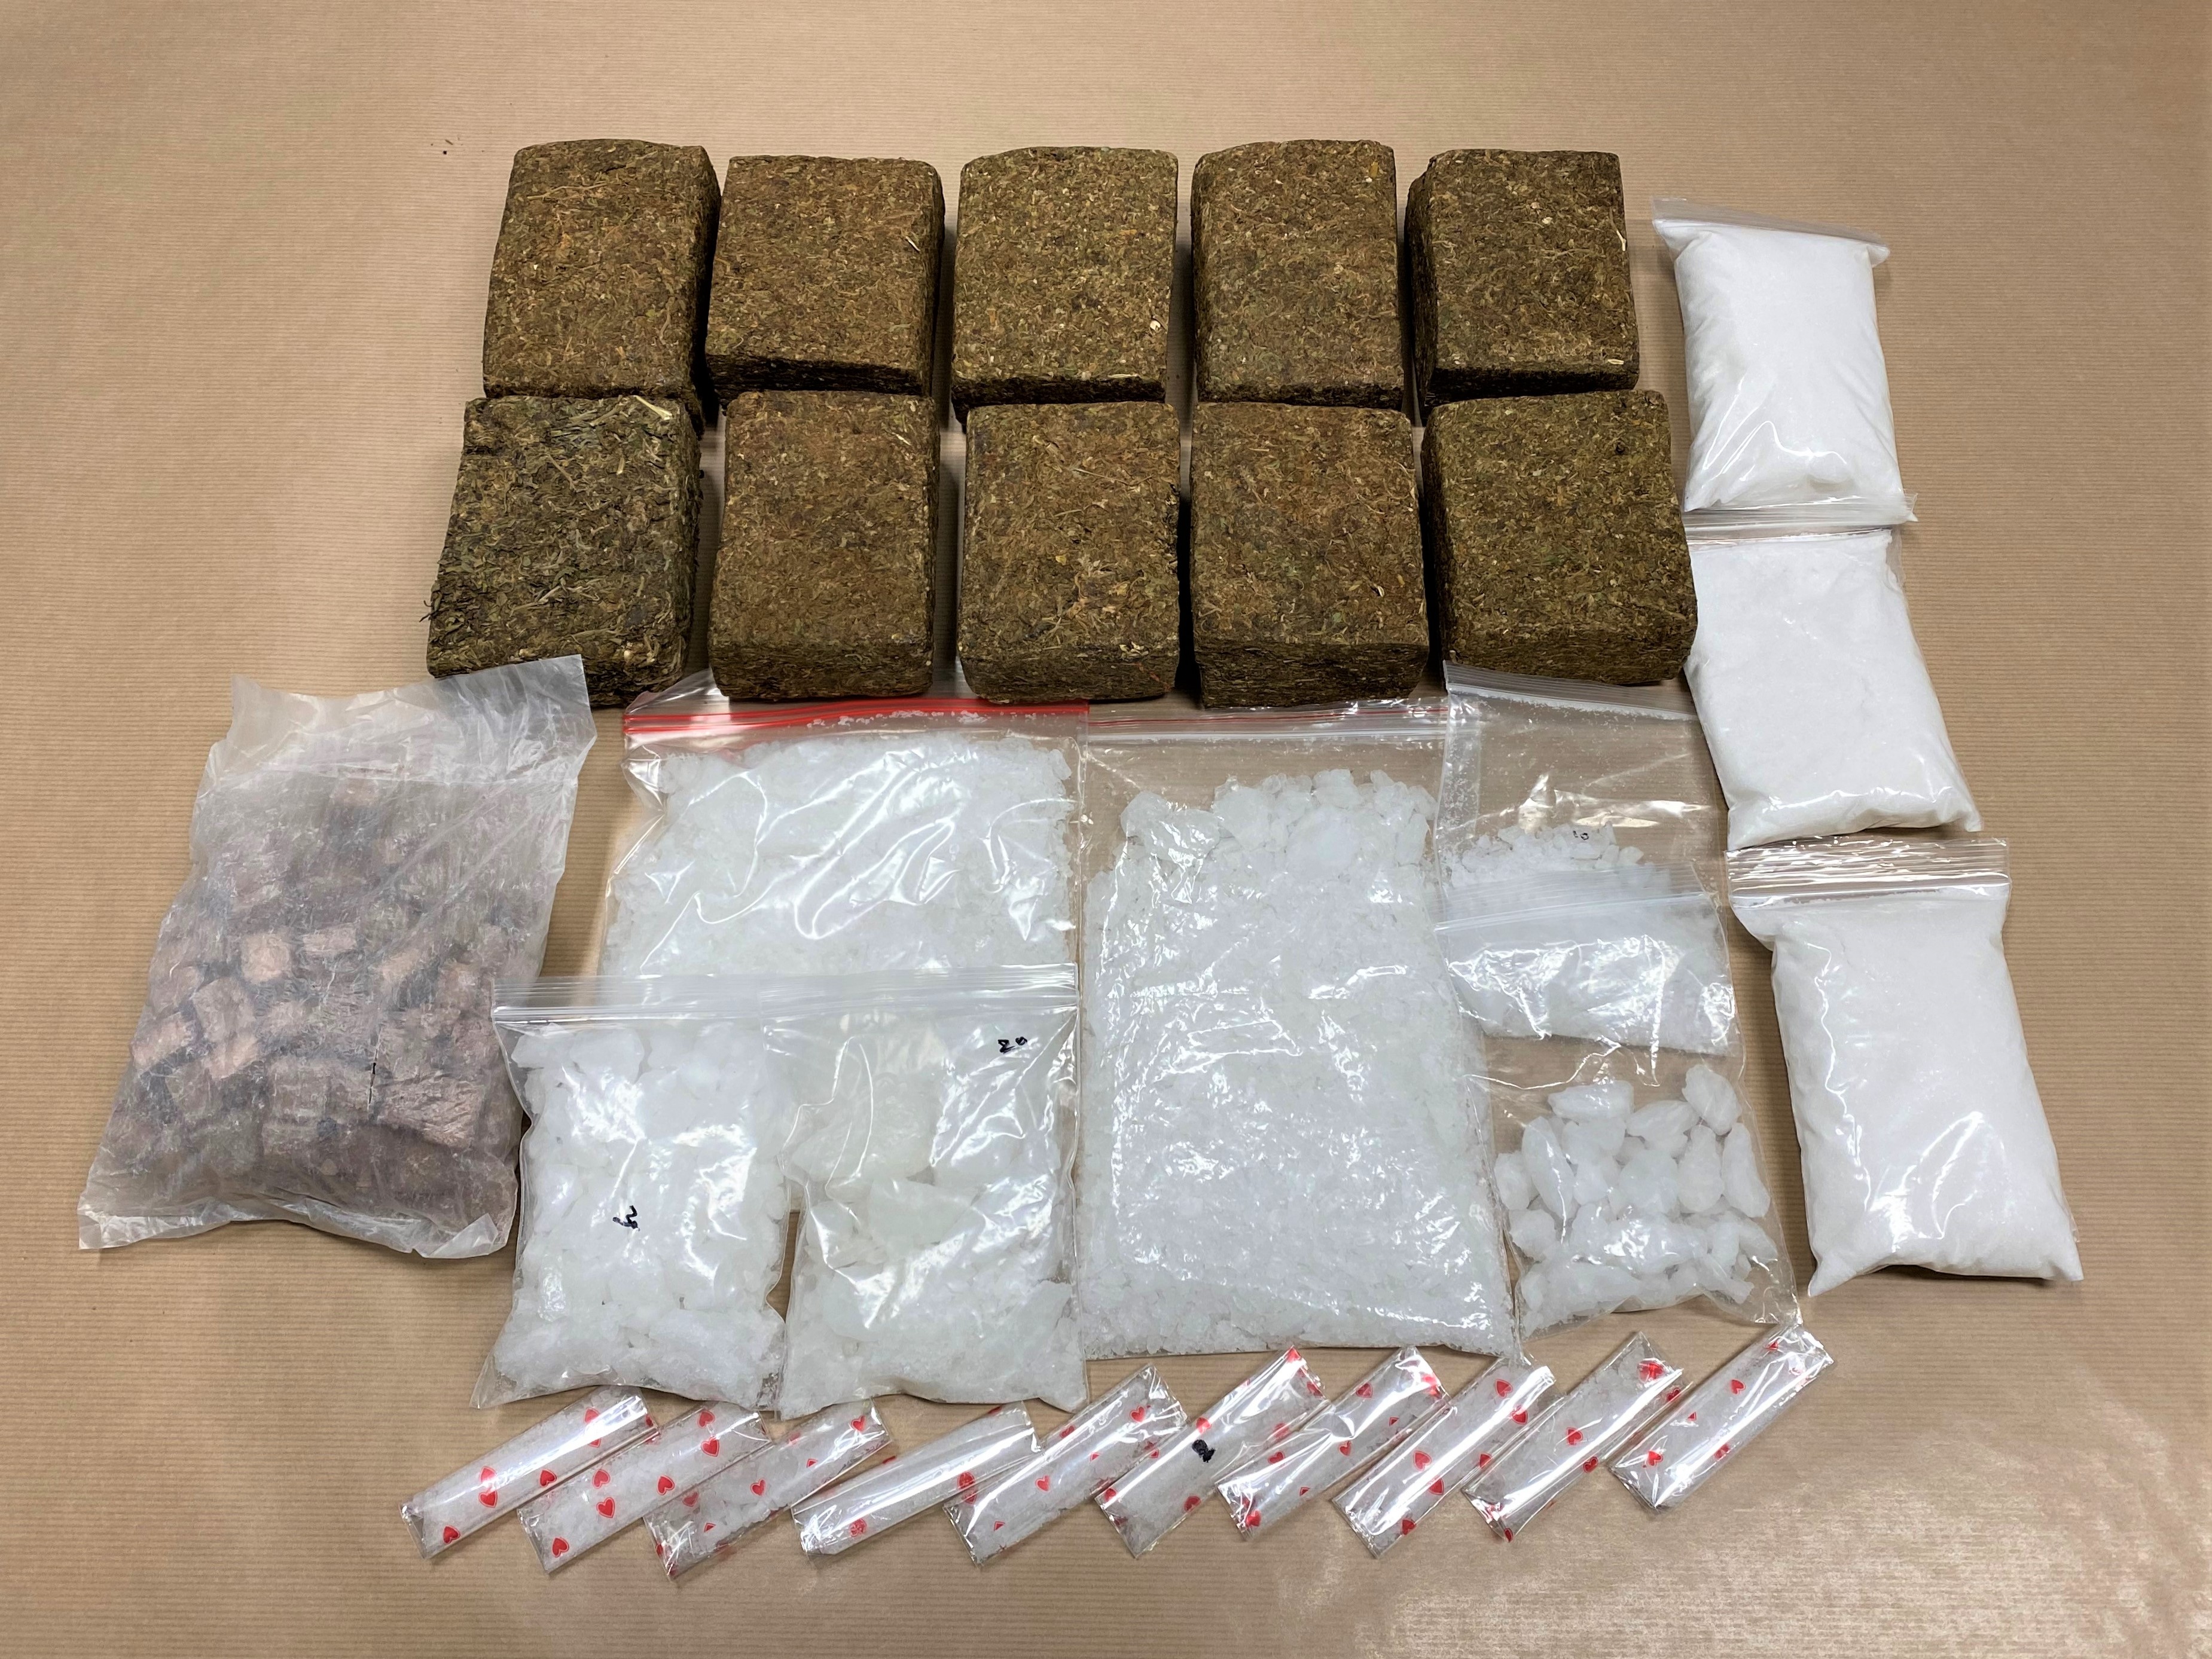 Photo 3 (CNB): Cannabis, heroin and ‘Ice’ seized from a CNB operation on 17 December 2020, which took place in multiple locations in Singapore. 